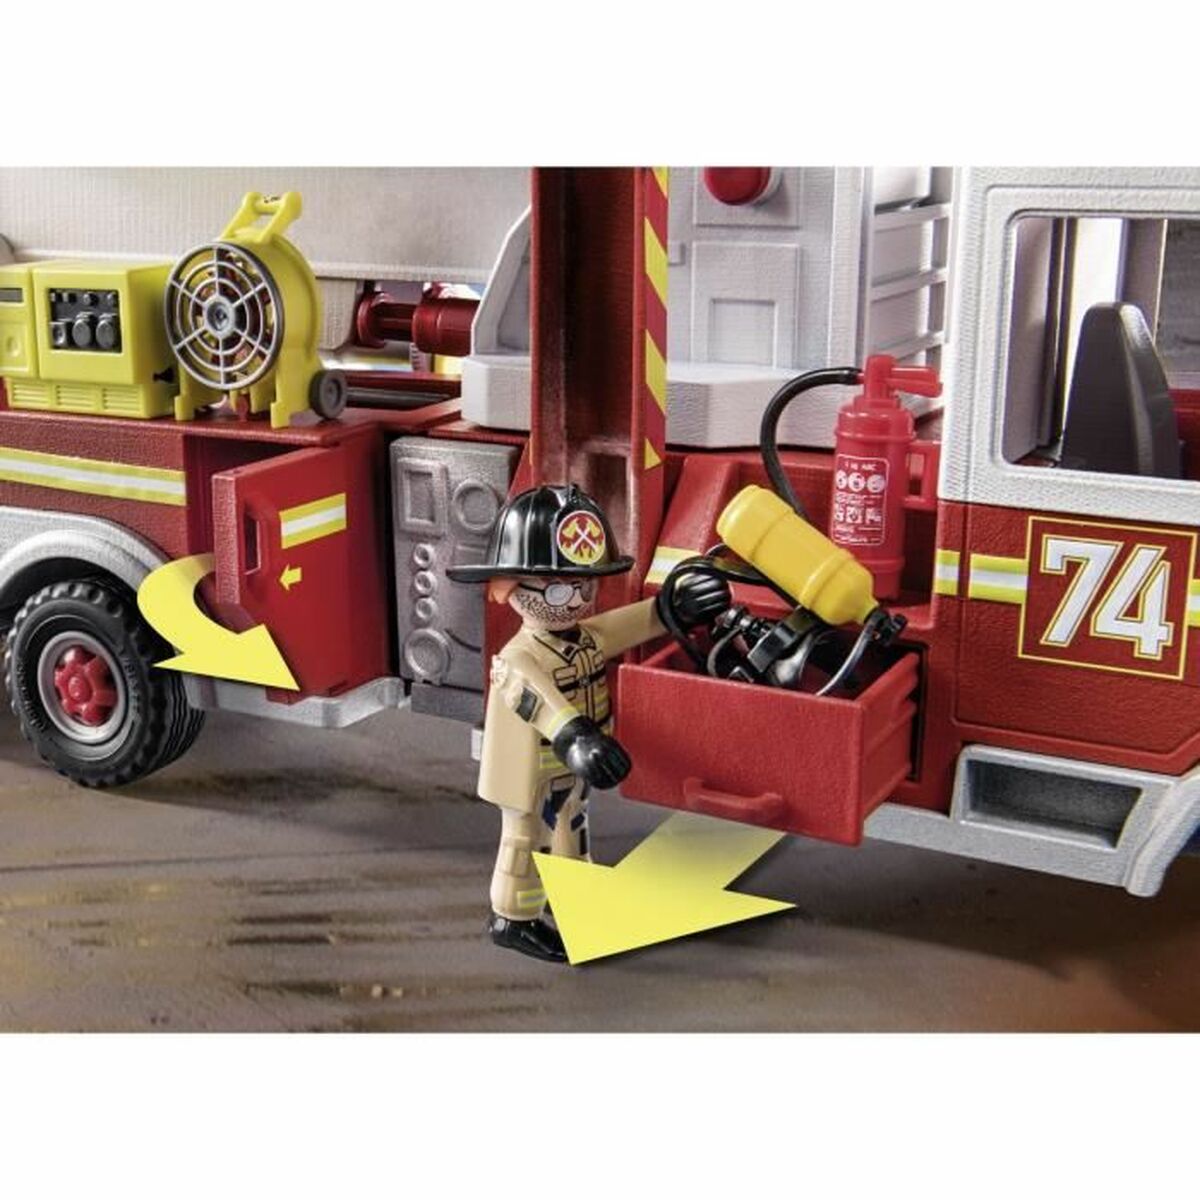 Vehicle Playset   Playmobil Fire Truck with Ladder 70935         113 Pieces  